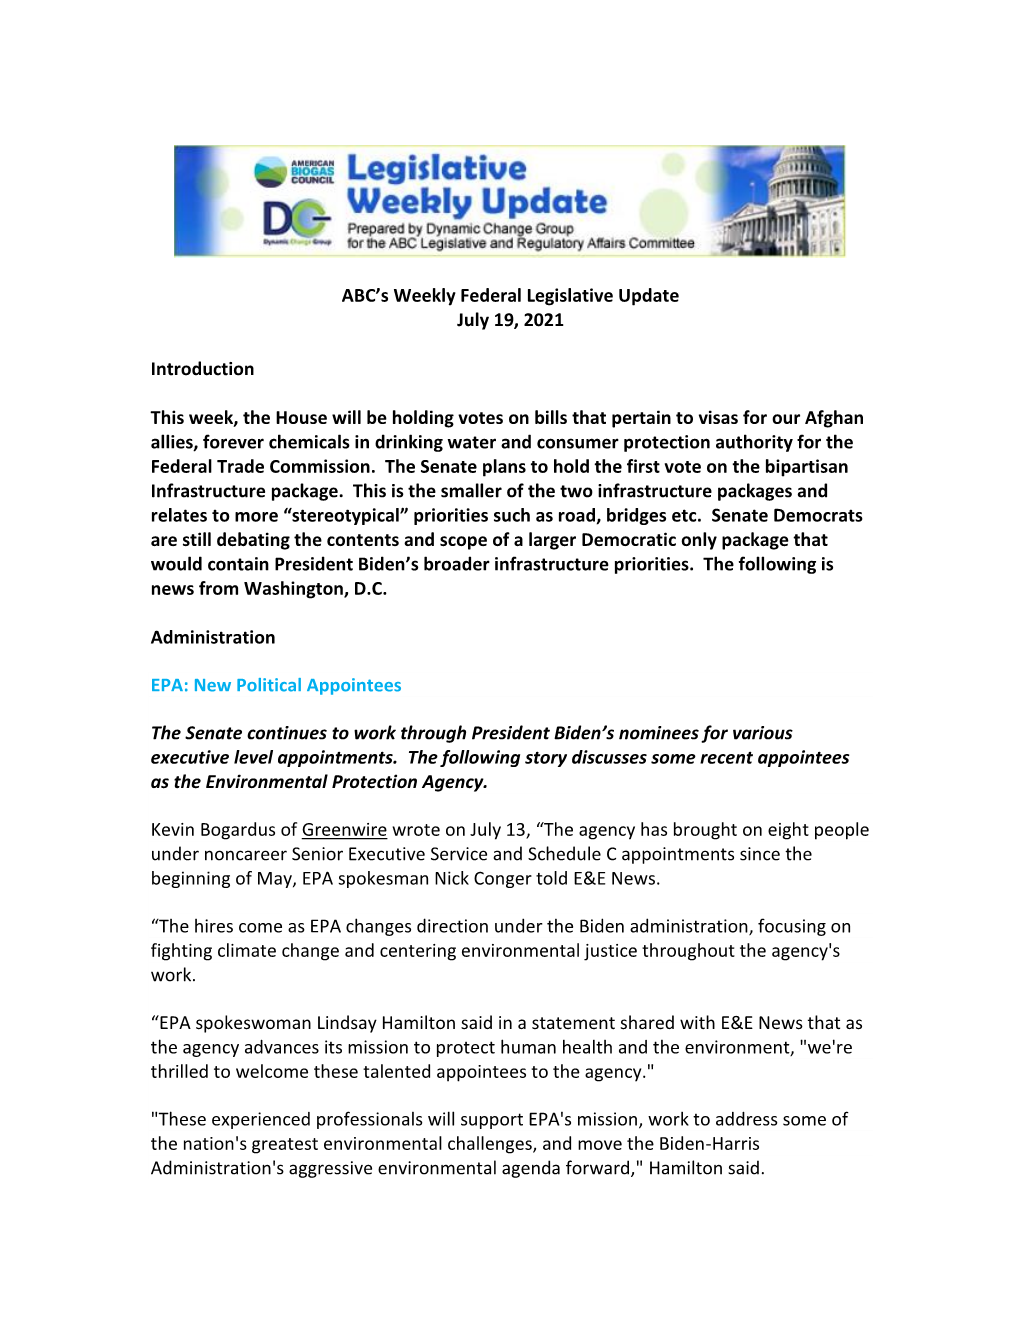 ABC's Weekly Federal Legislative Update July 19, 2021 Introduction This Week, the House Will Be Holding Votes on Bills That P